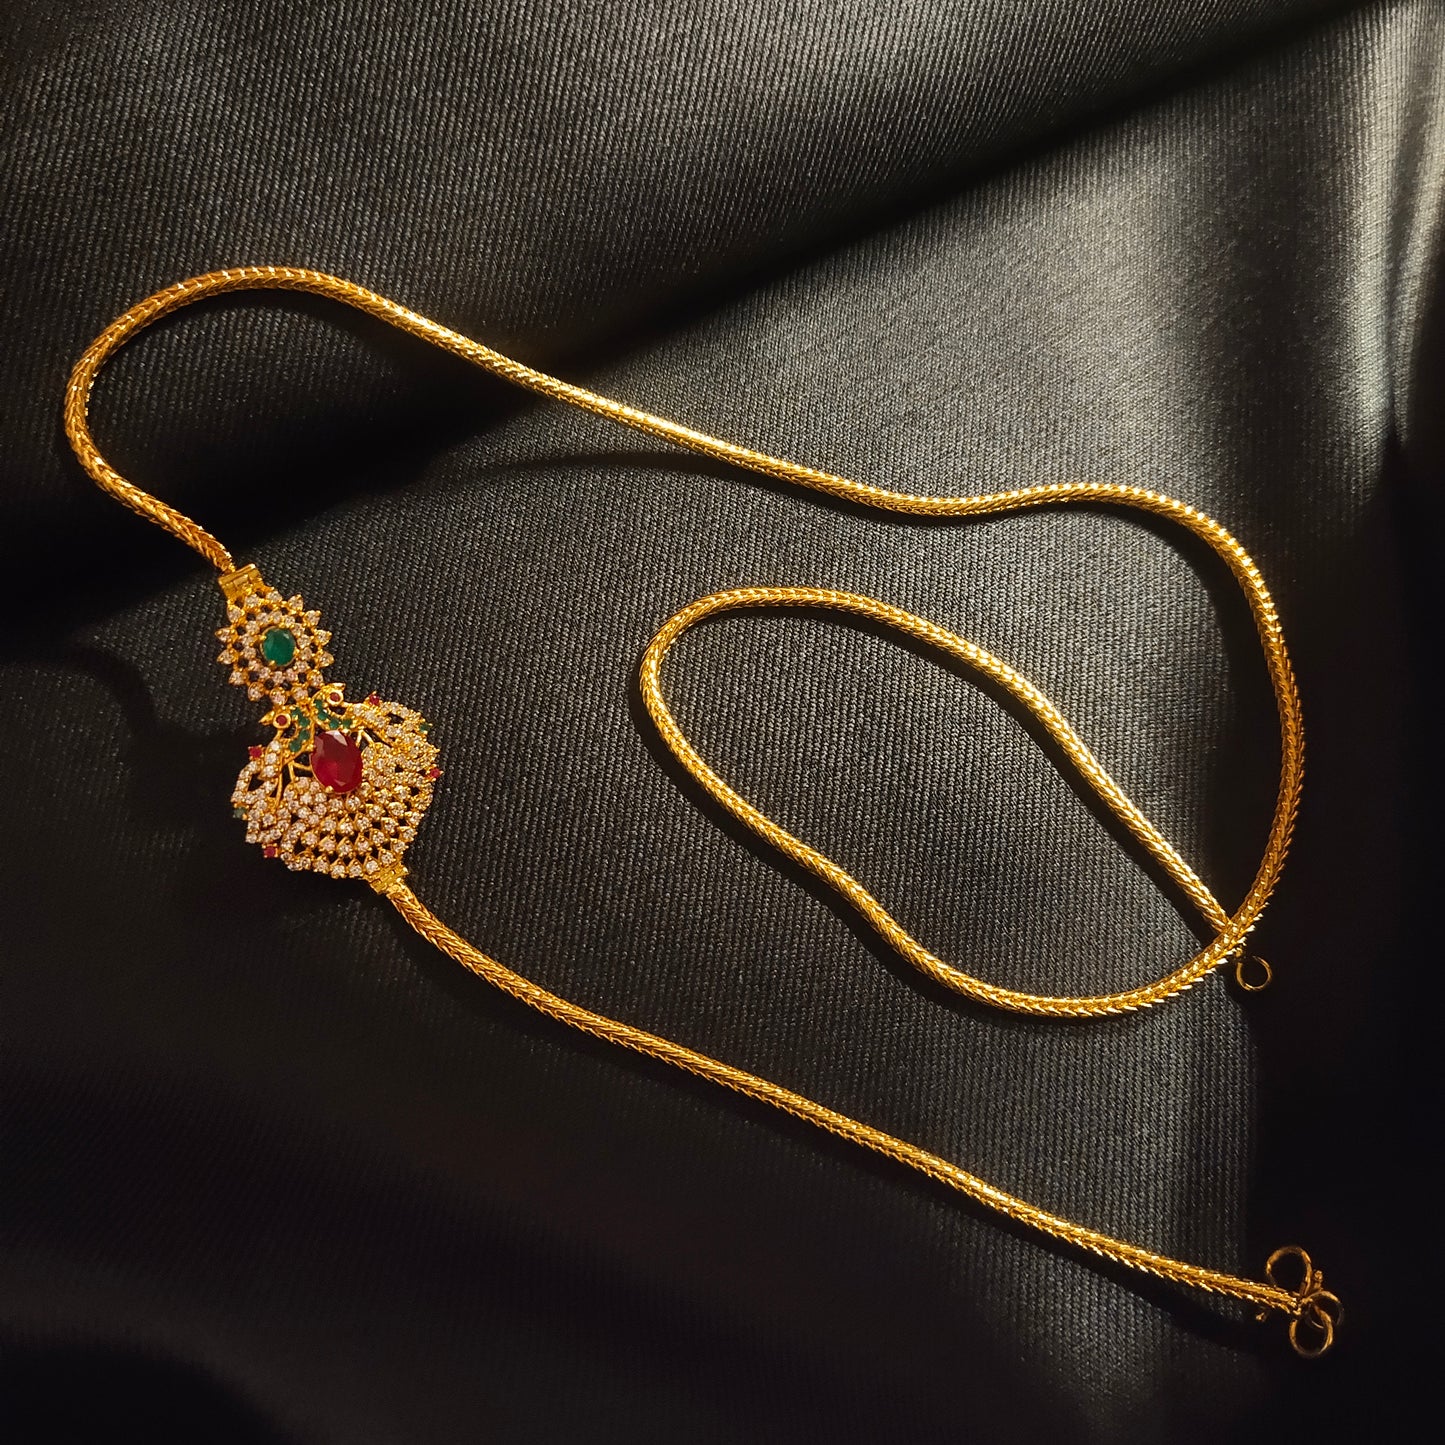 "Dazzle in Elegance: The Exquisite 24K Gold Plated CZ Mugappu Chain by ASP Fashion Jewellery"